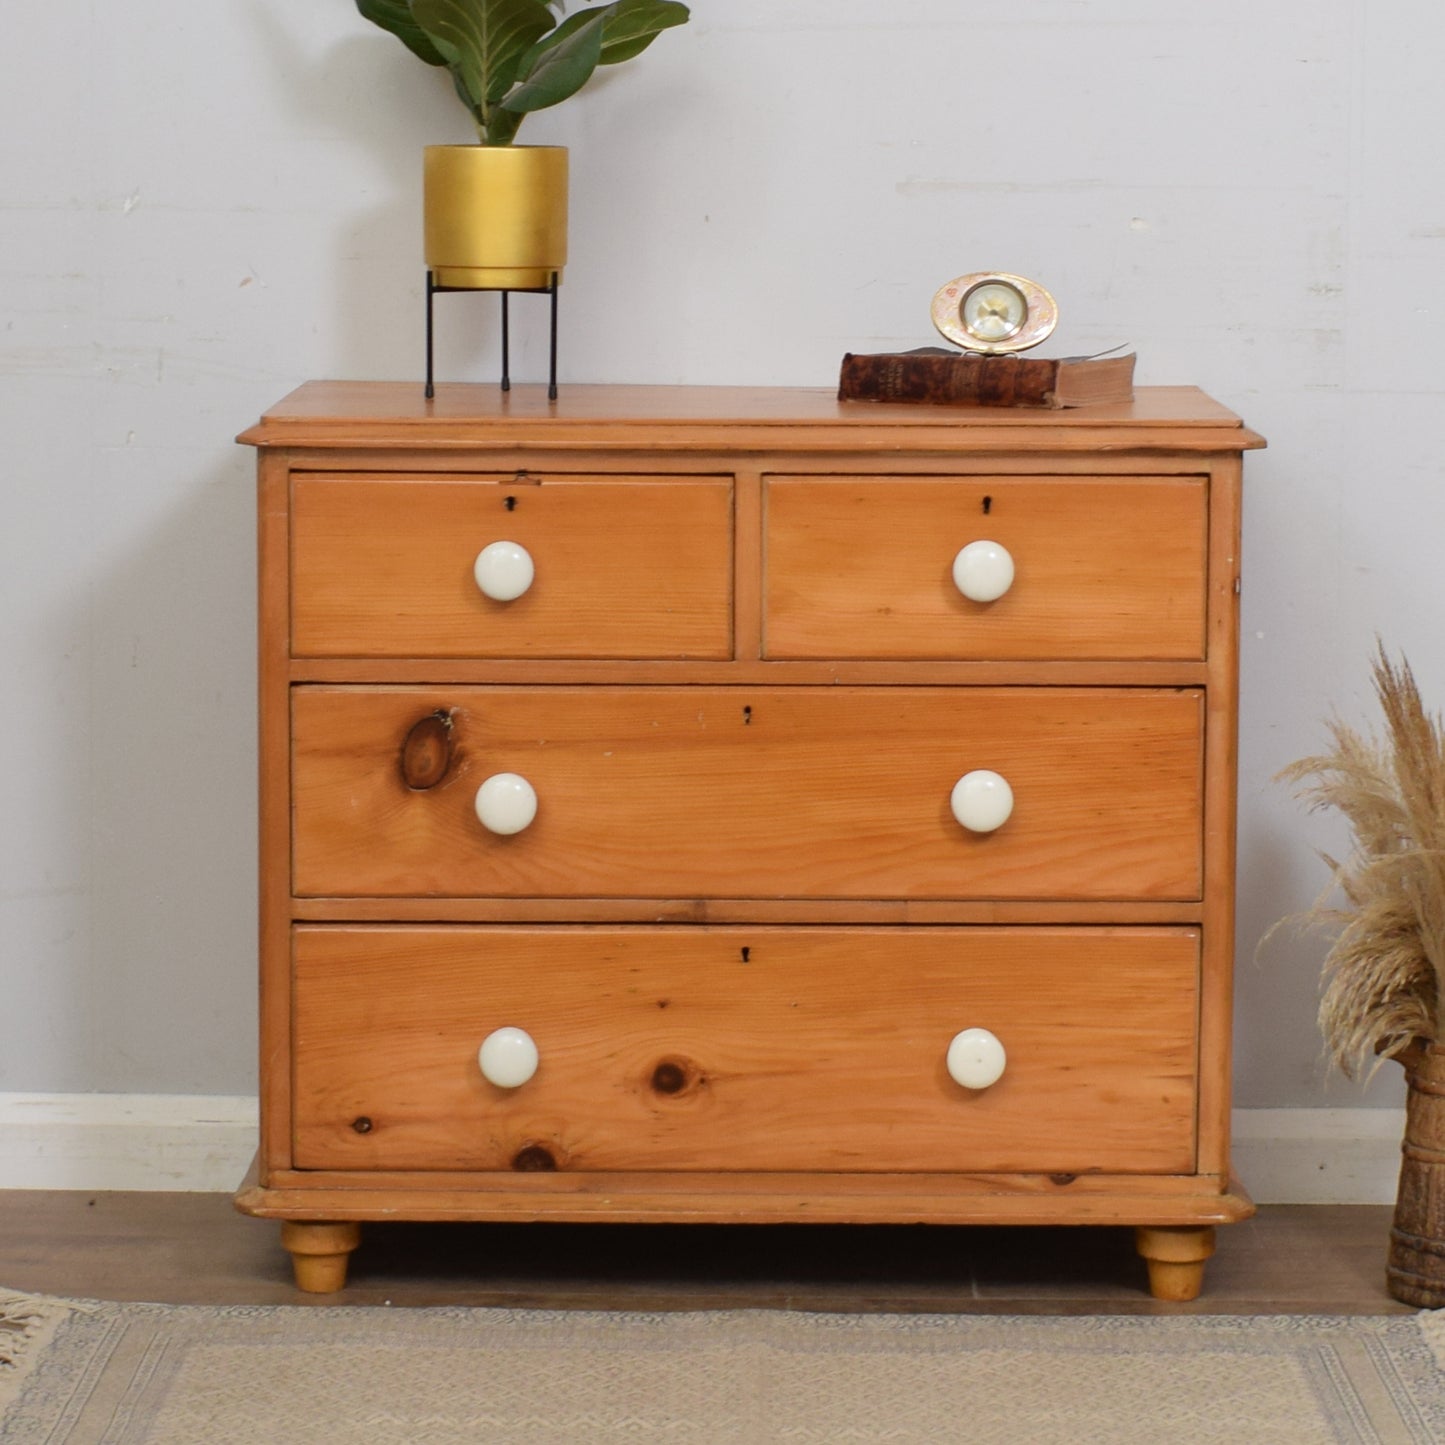 Antique Pine Chest Of Drawers